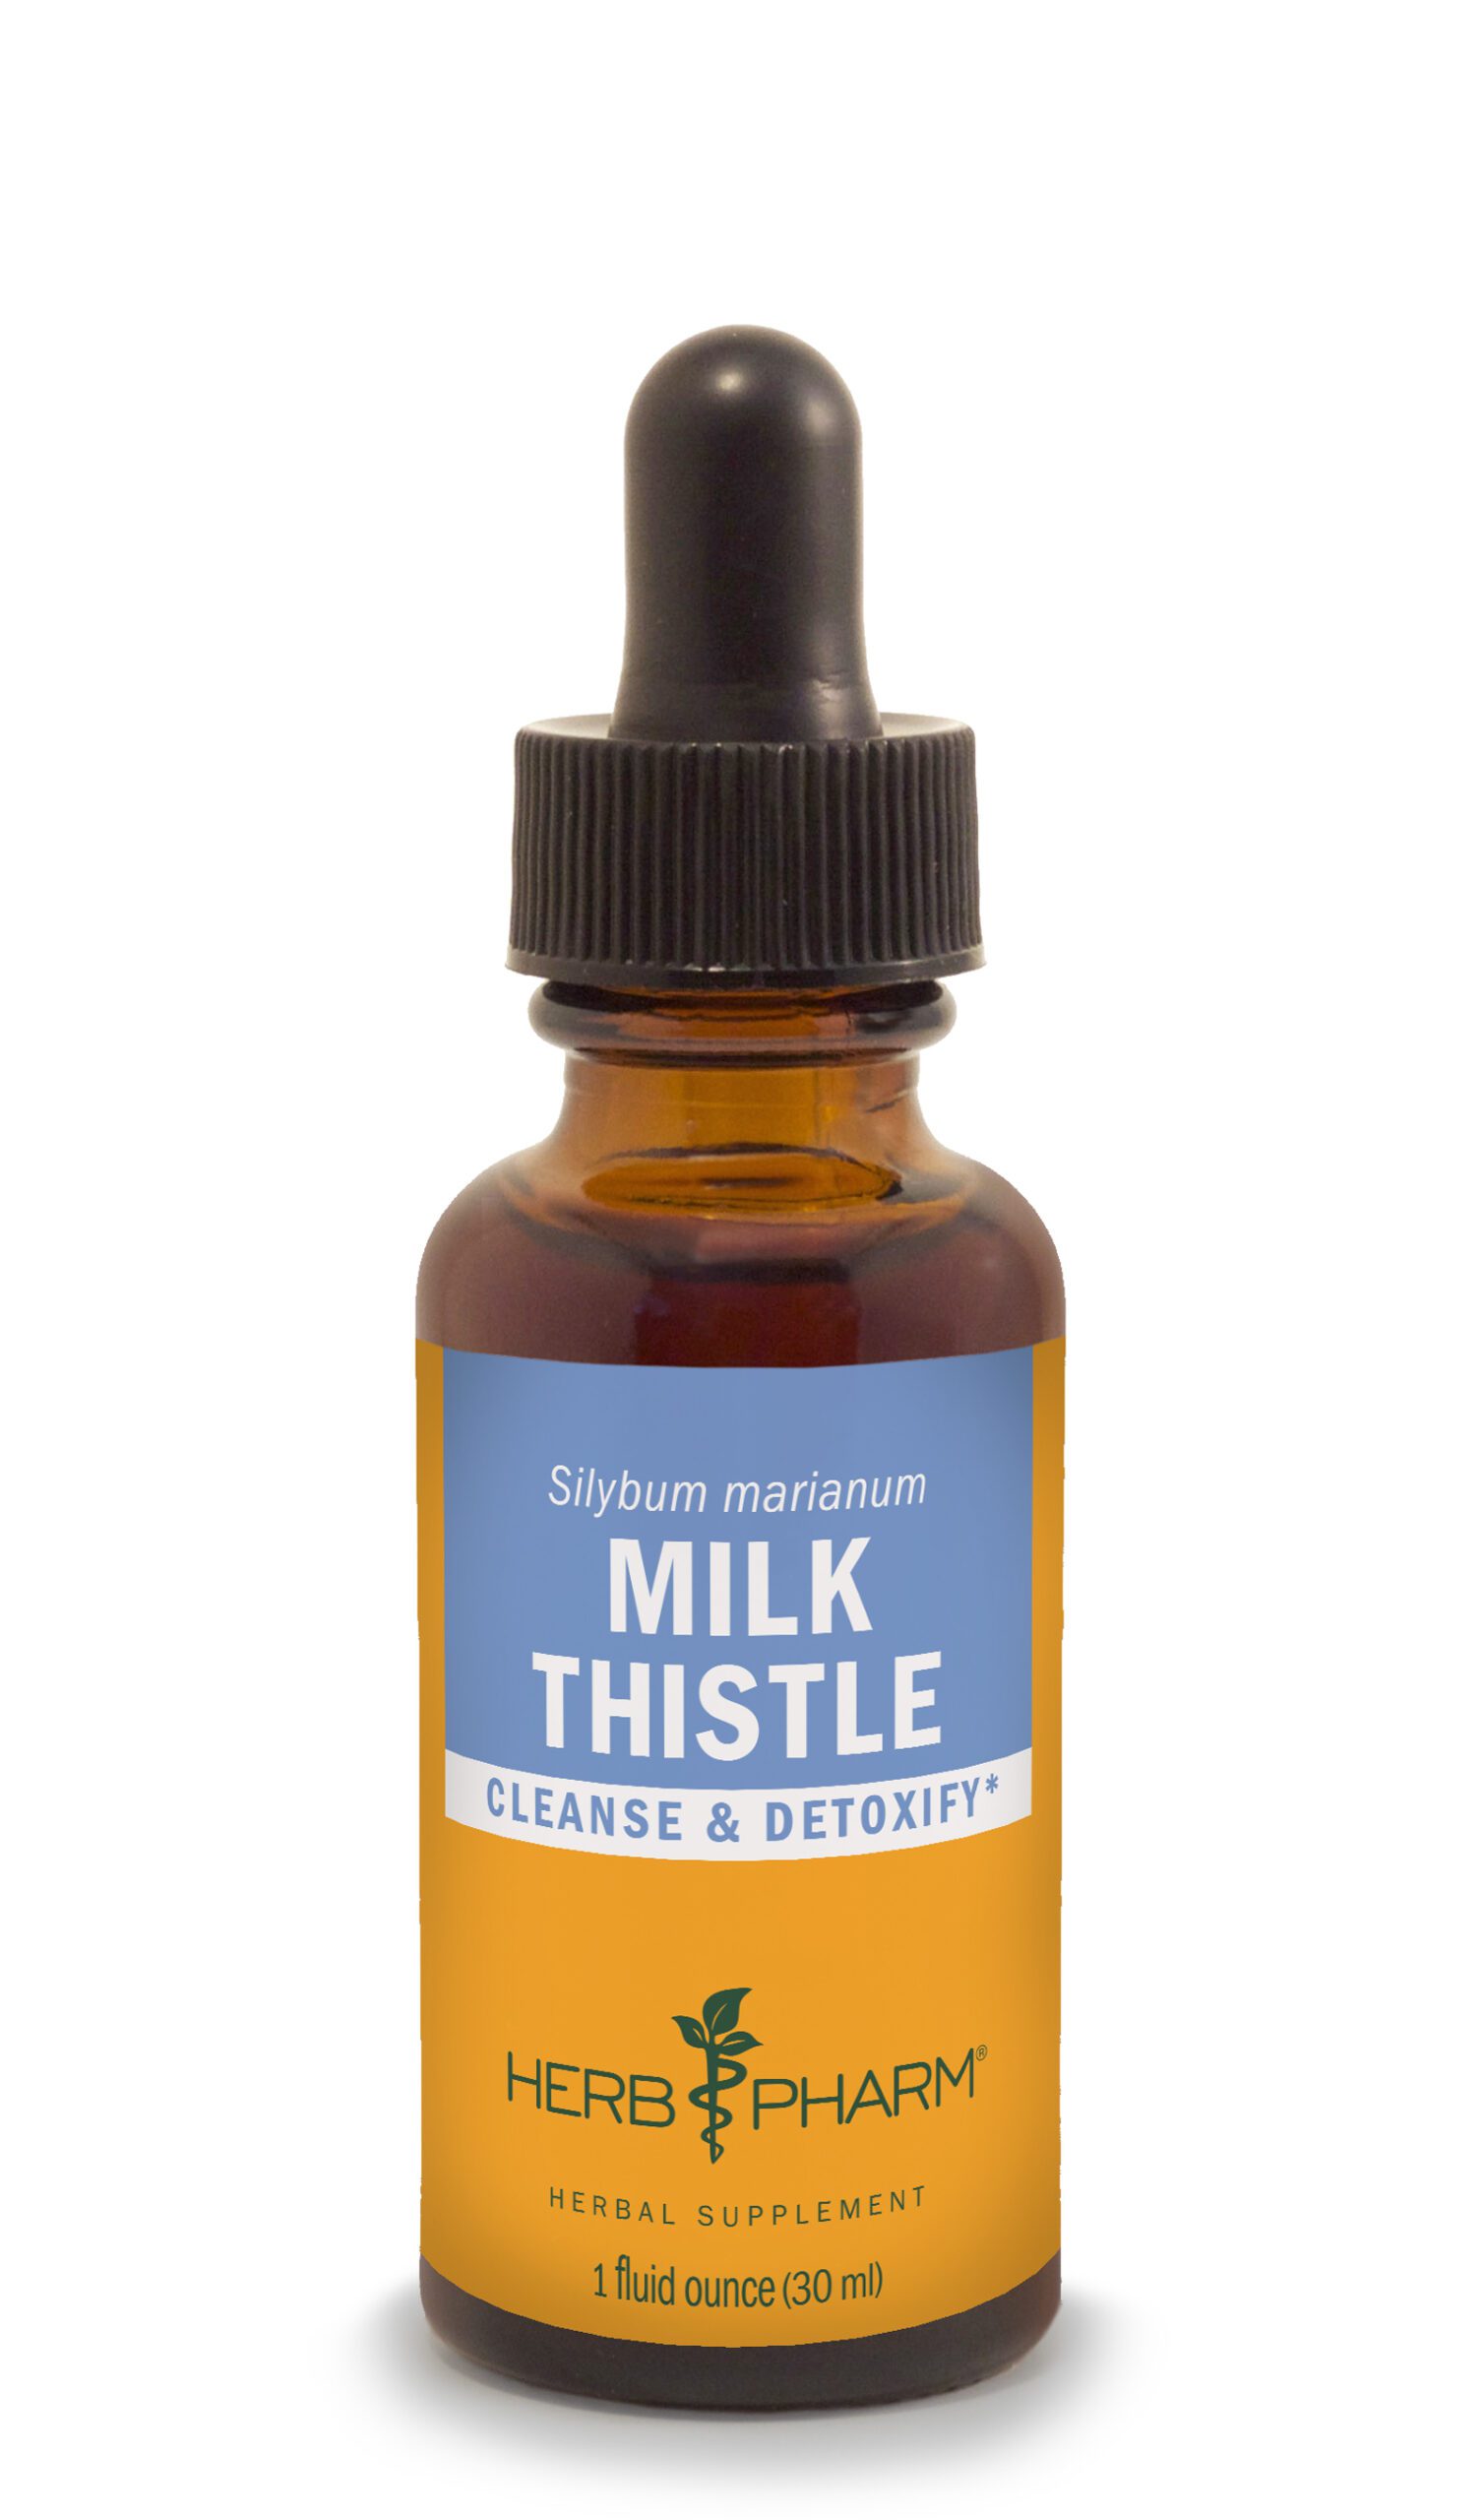 Product Listing Image for Herb Pharm Milk Thistle Tincture 1oz